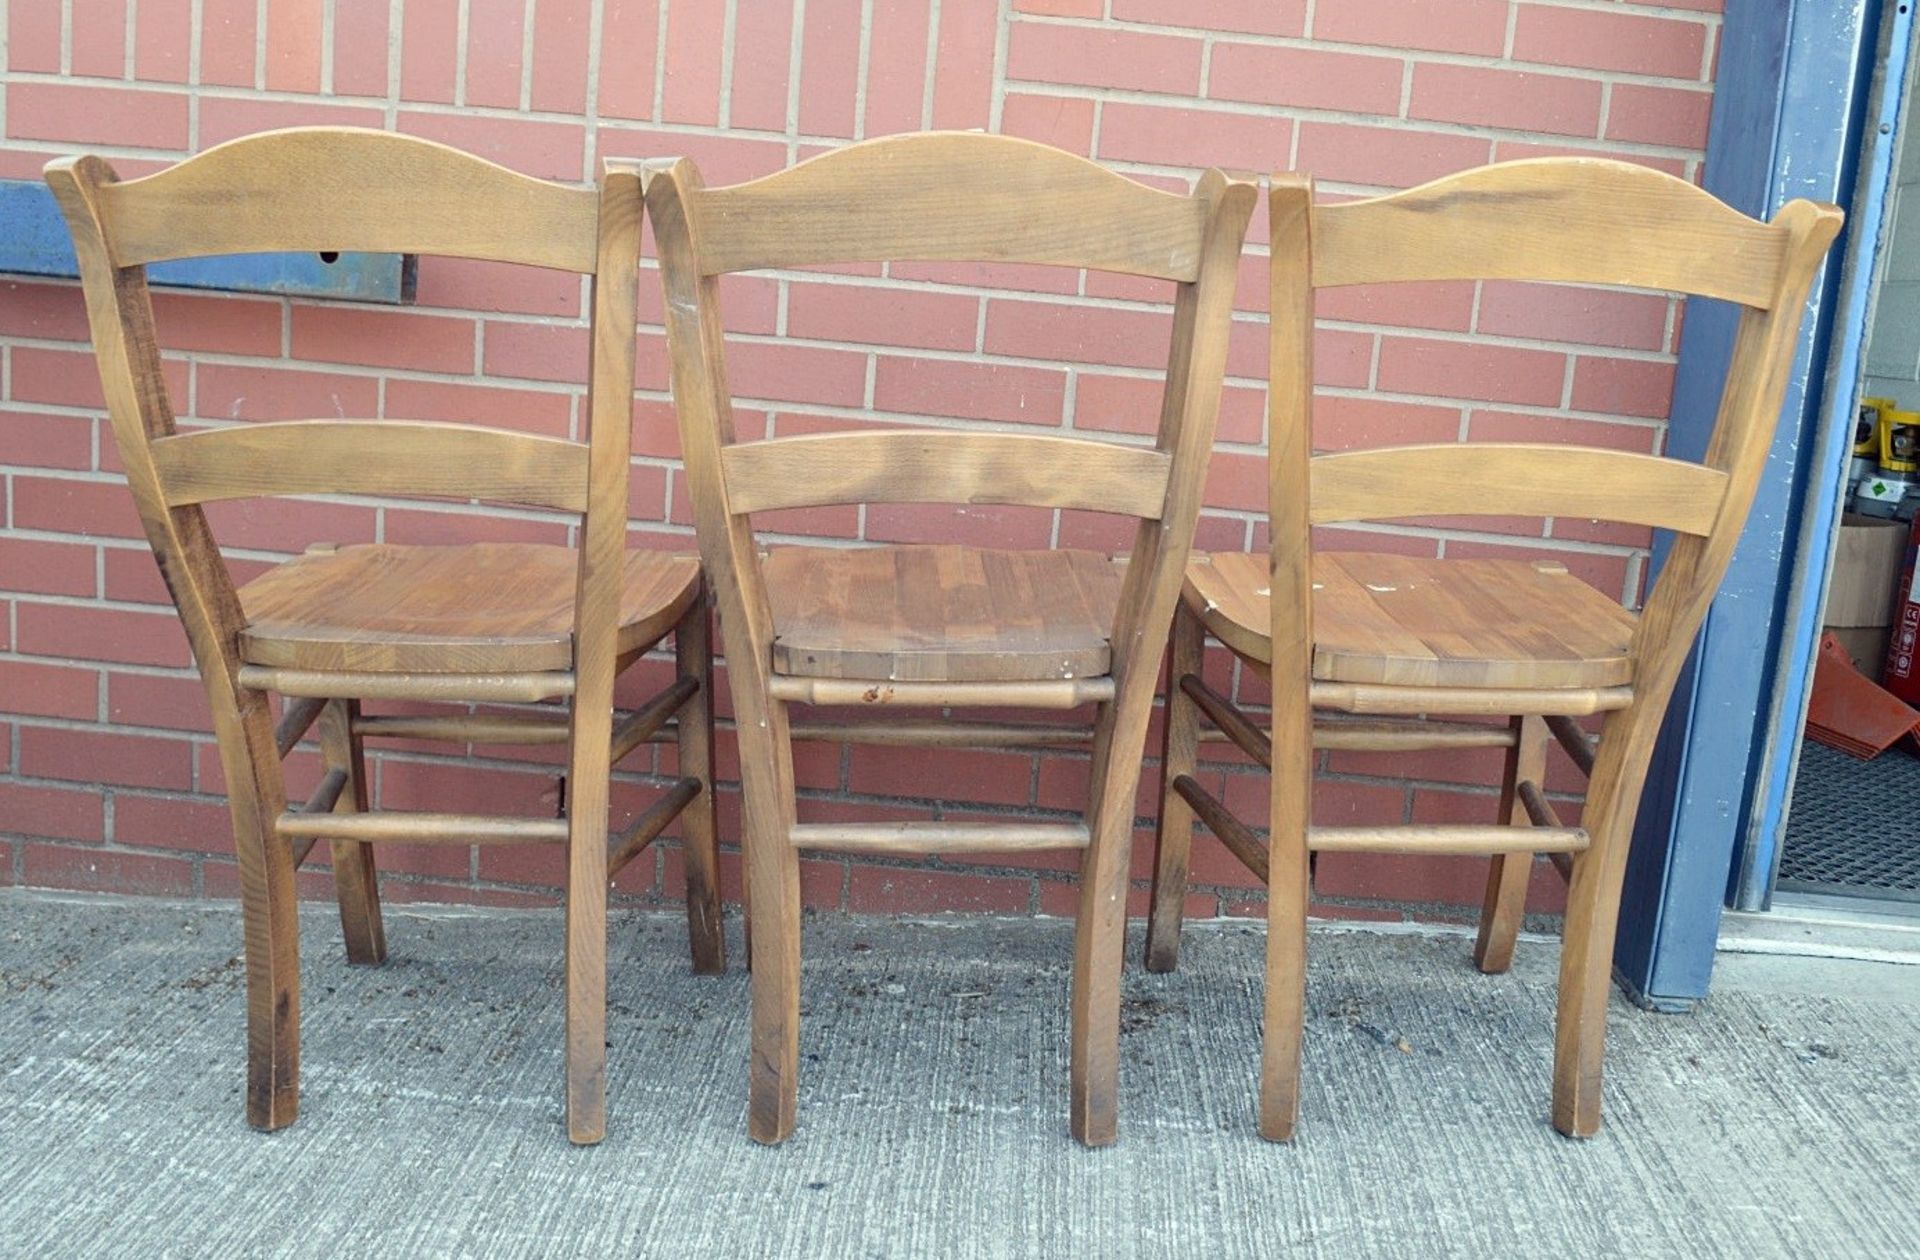 3 x Matching Sturdy Solid Wood Chairs With An Attractive Varnished Finish - Dimensions: H90 x W47 - Image 4 of 7